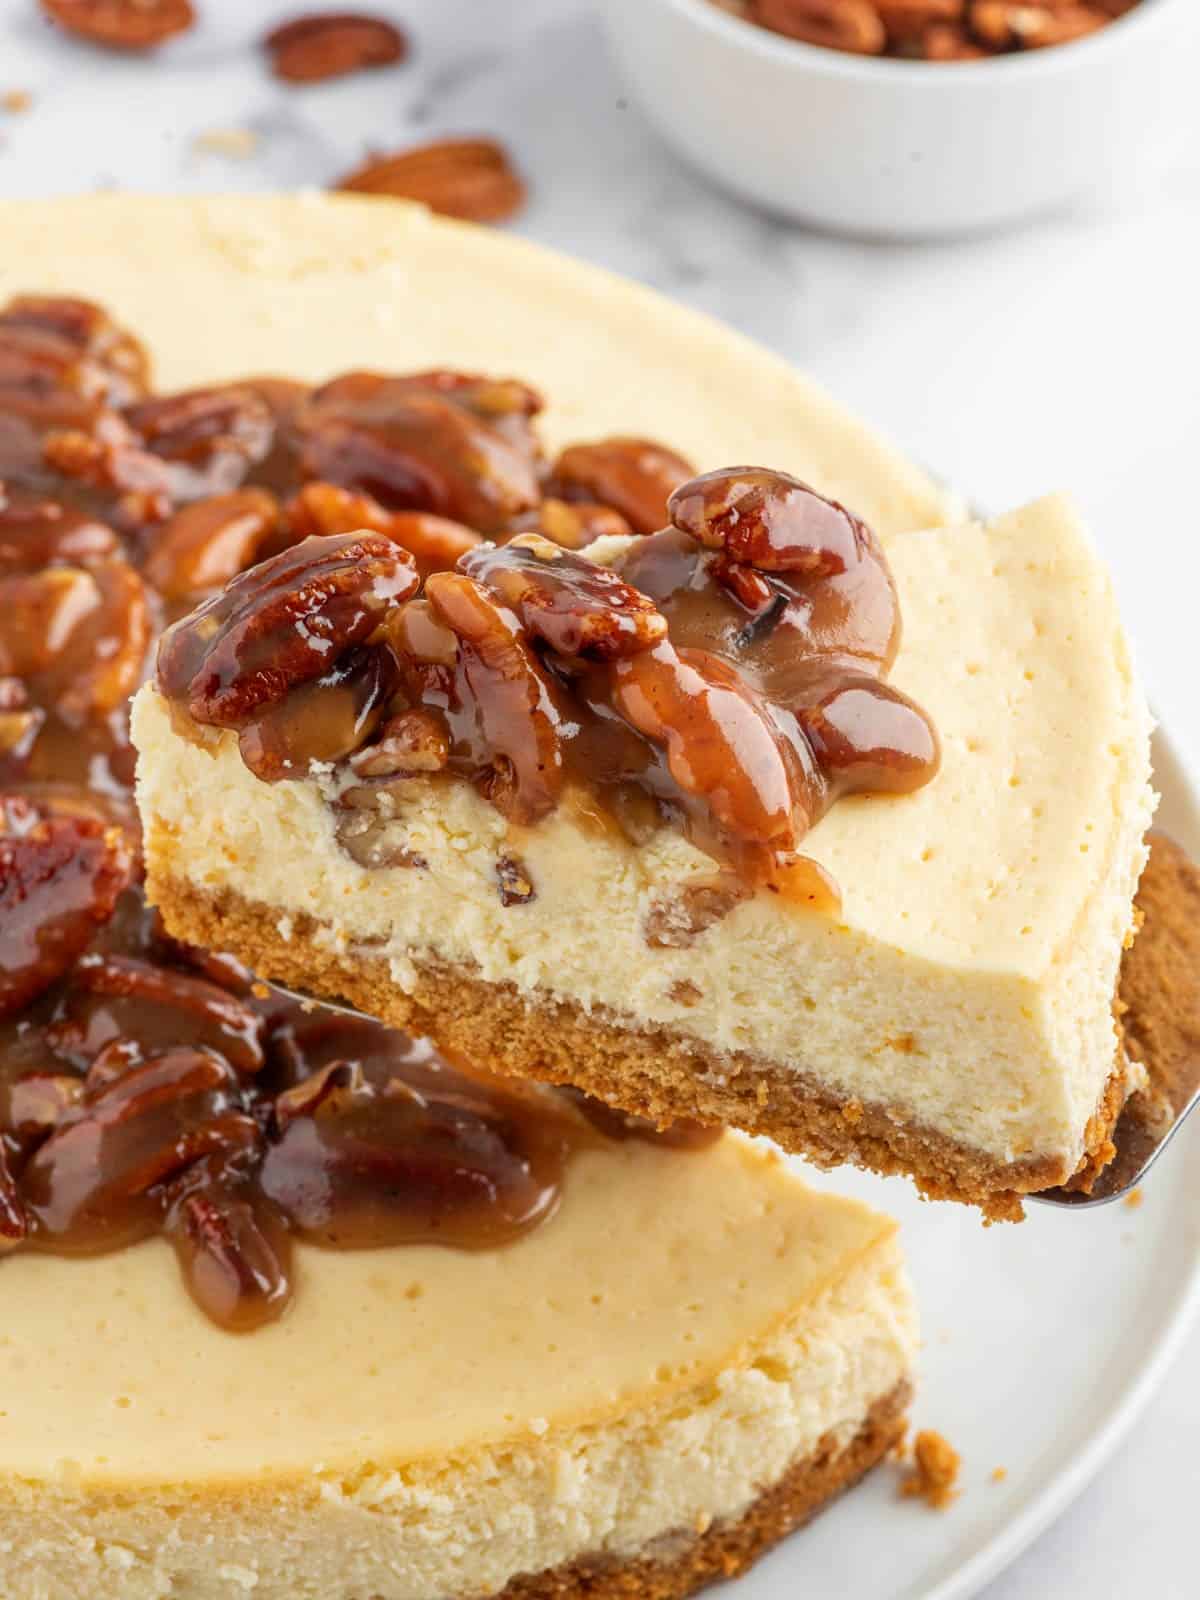 A slice of cheesecake topped with caramel pecan sauce is lifted.